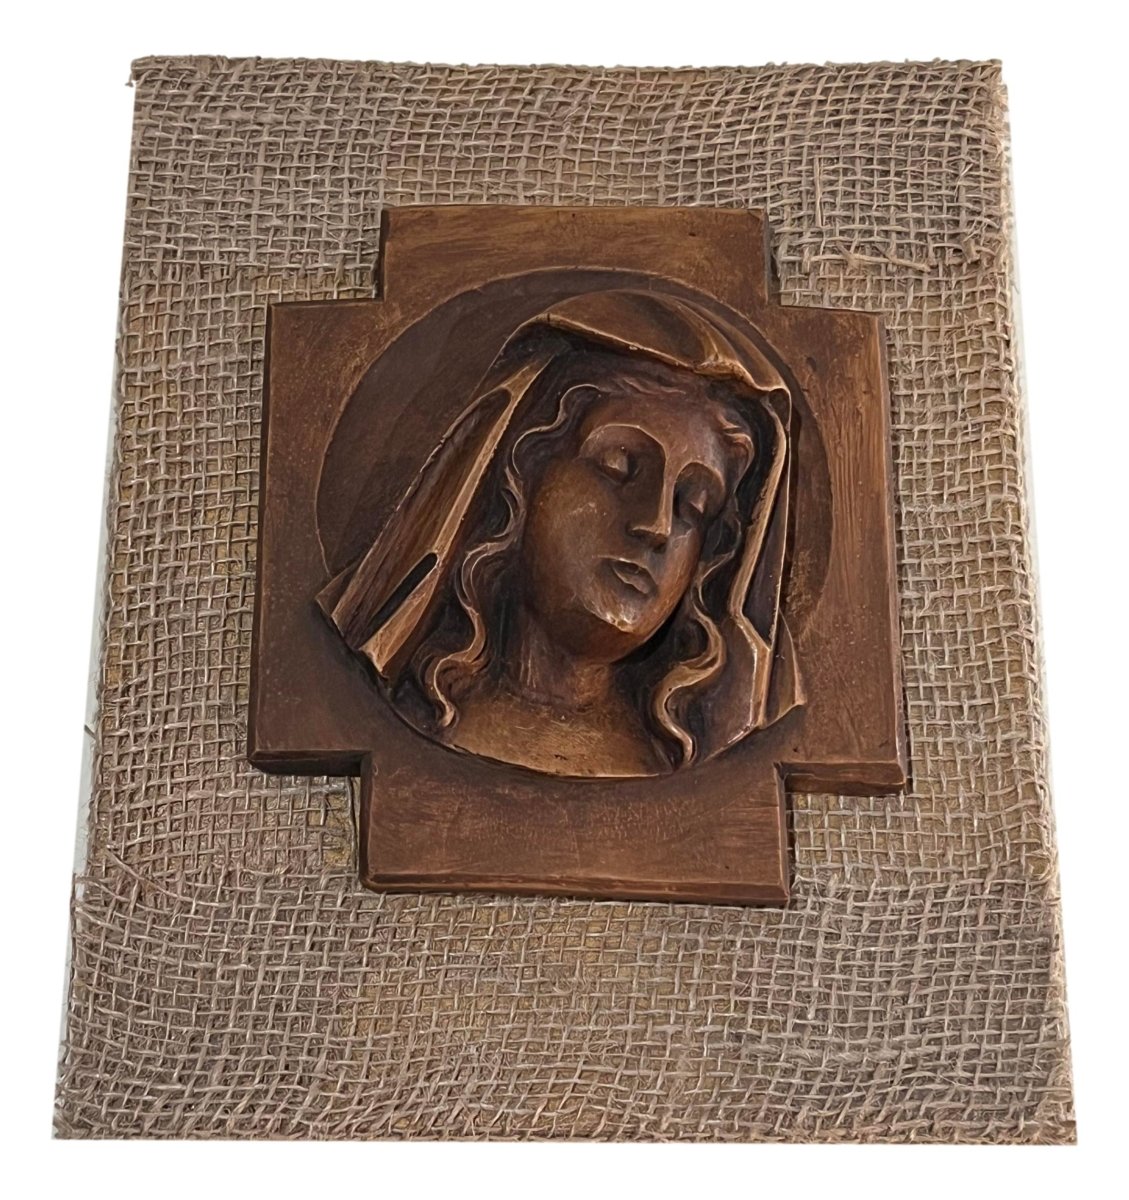 Art Virgen On Burlap Covered Wooden Plaque Handcrafted By Local Artisans L: 10 inches X W: 8 inches - Ysleta Mission Gift Shop